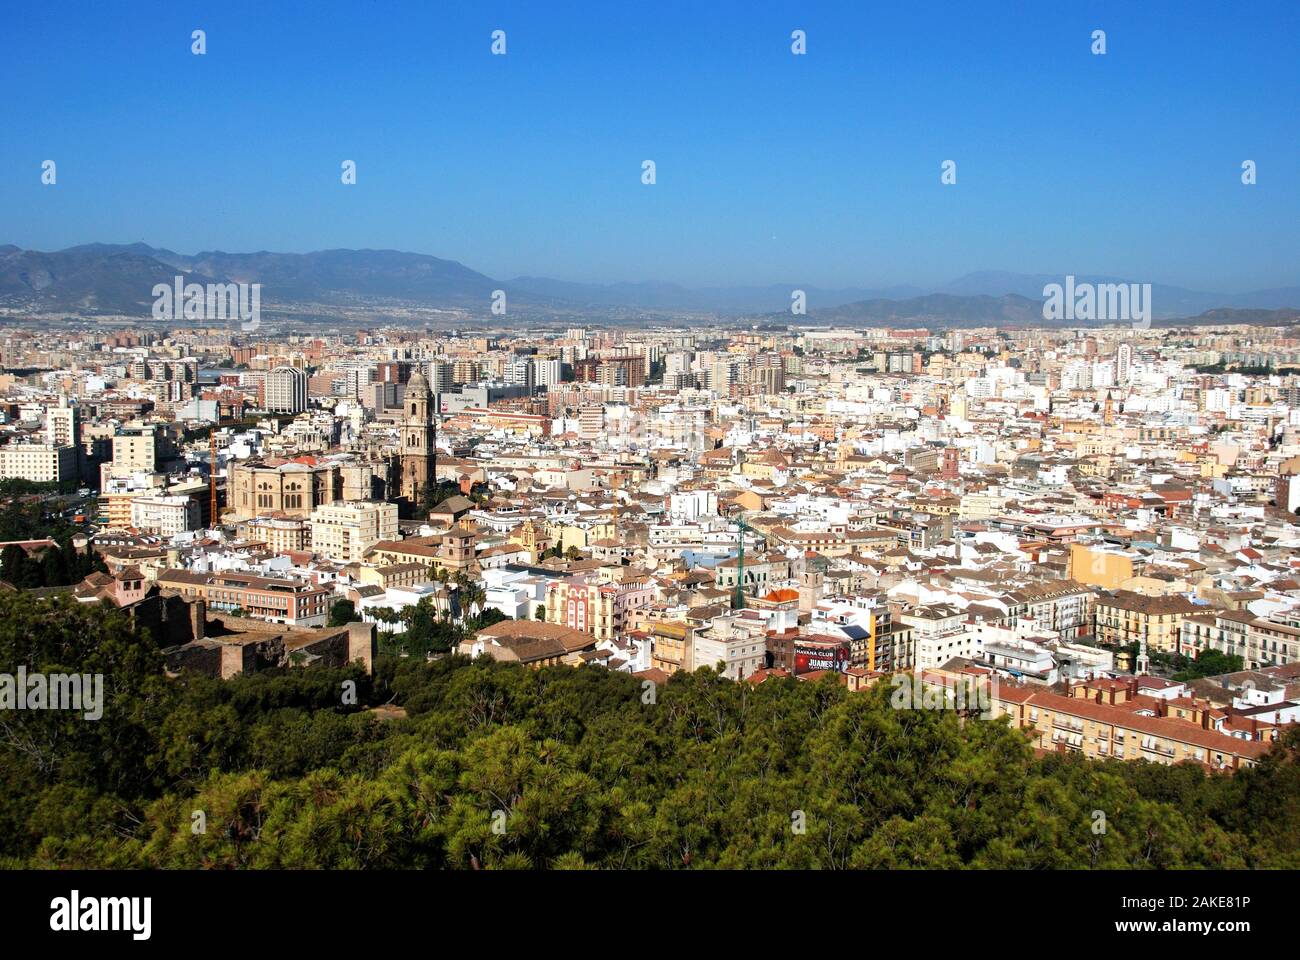 Elevated view of the city with the cathedral in the foreground seen from the castle, Malaga, Malaga Province, Andalucia, Spain. Stock Photo